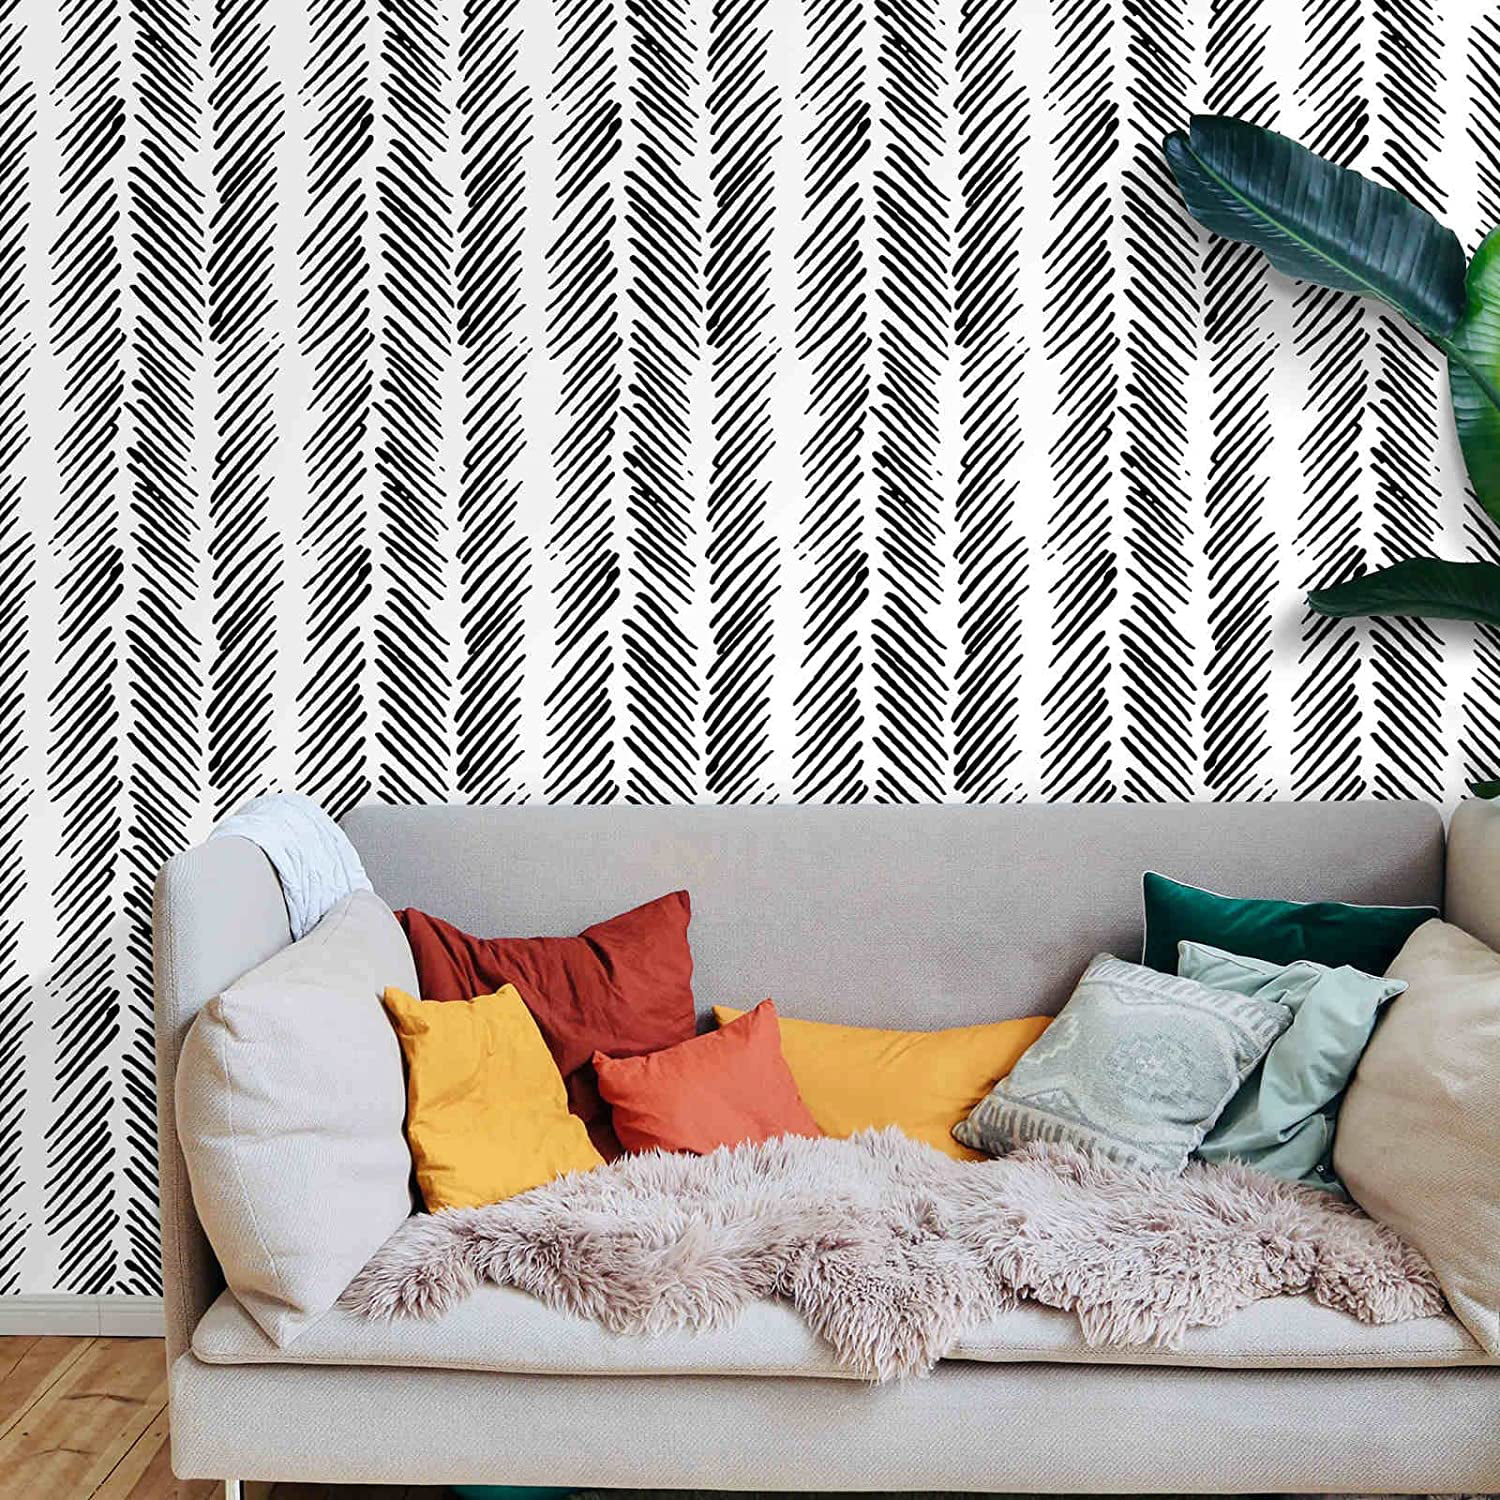 Home Decoration Feather Pattern Self Adhesive Peel and Stick Wallpaper 17.71 in X 118 in Self Stick Paper Used for DIY Project Easy to Use Film